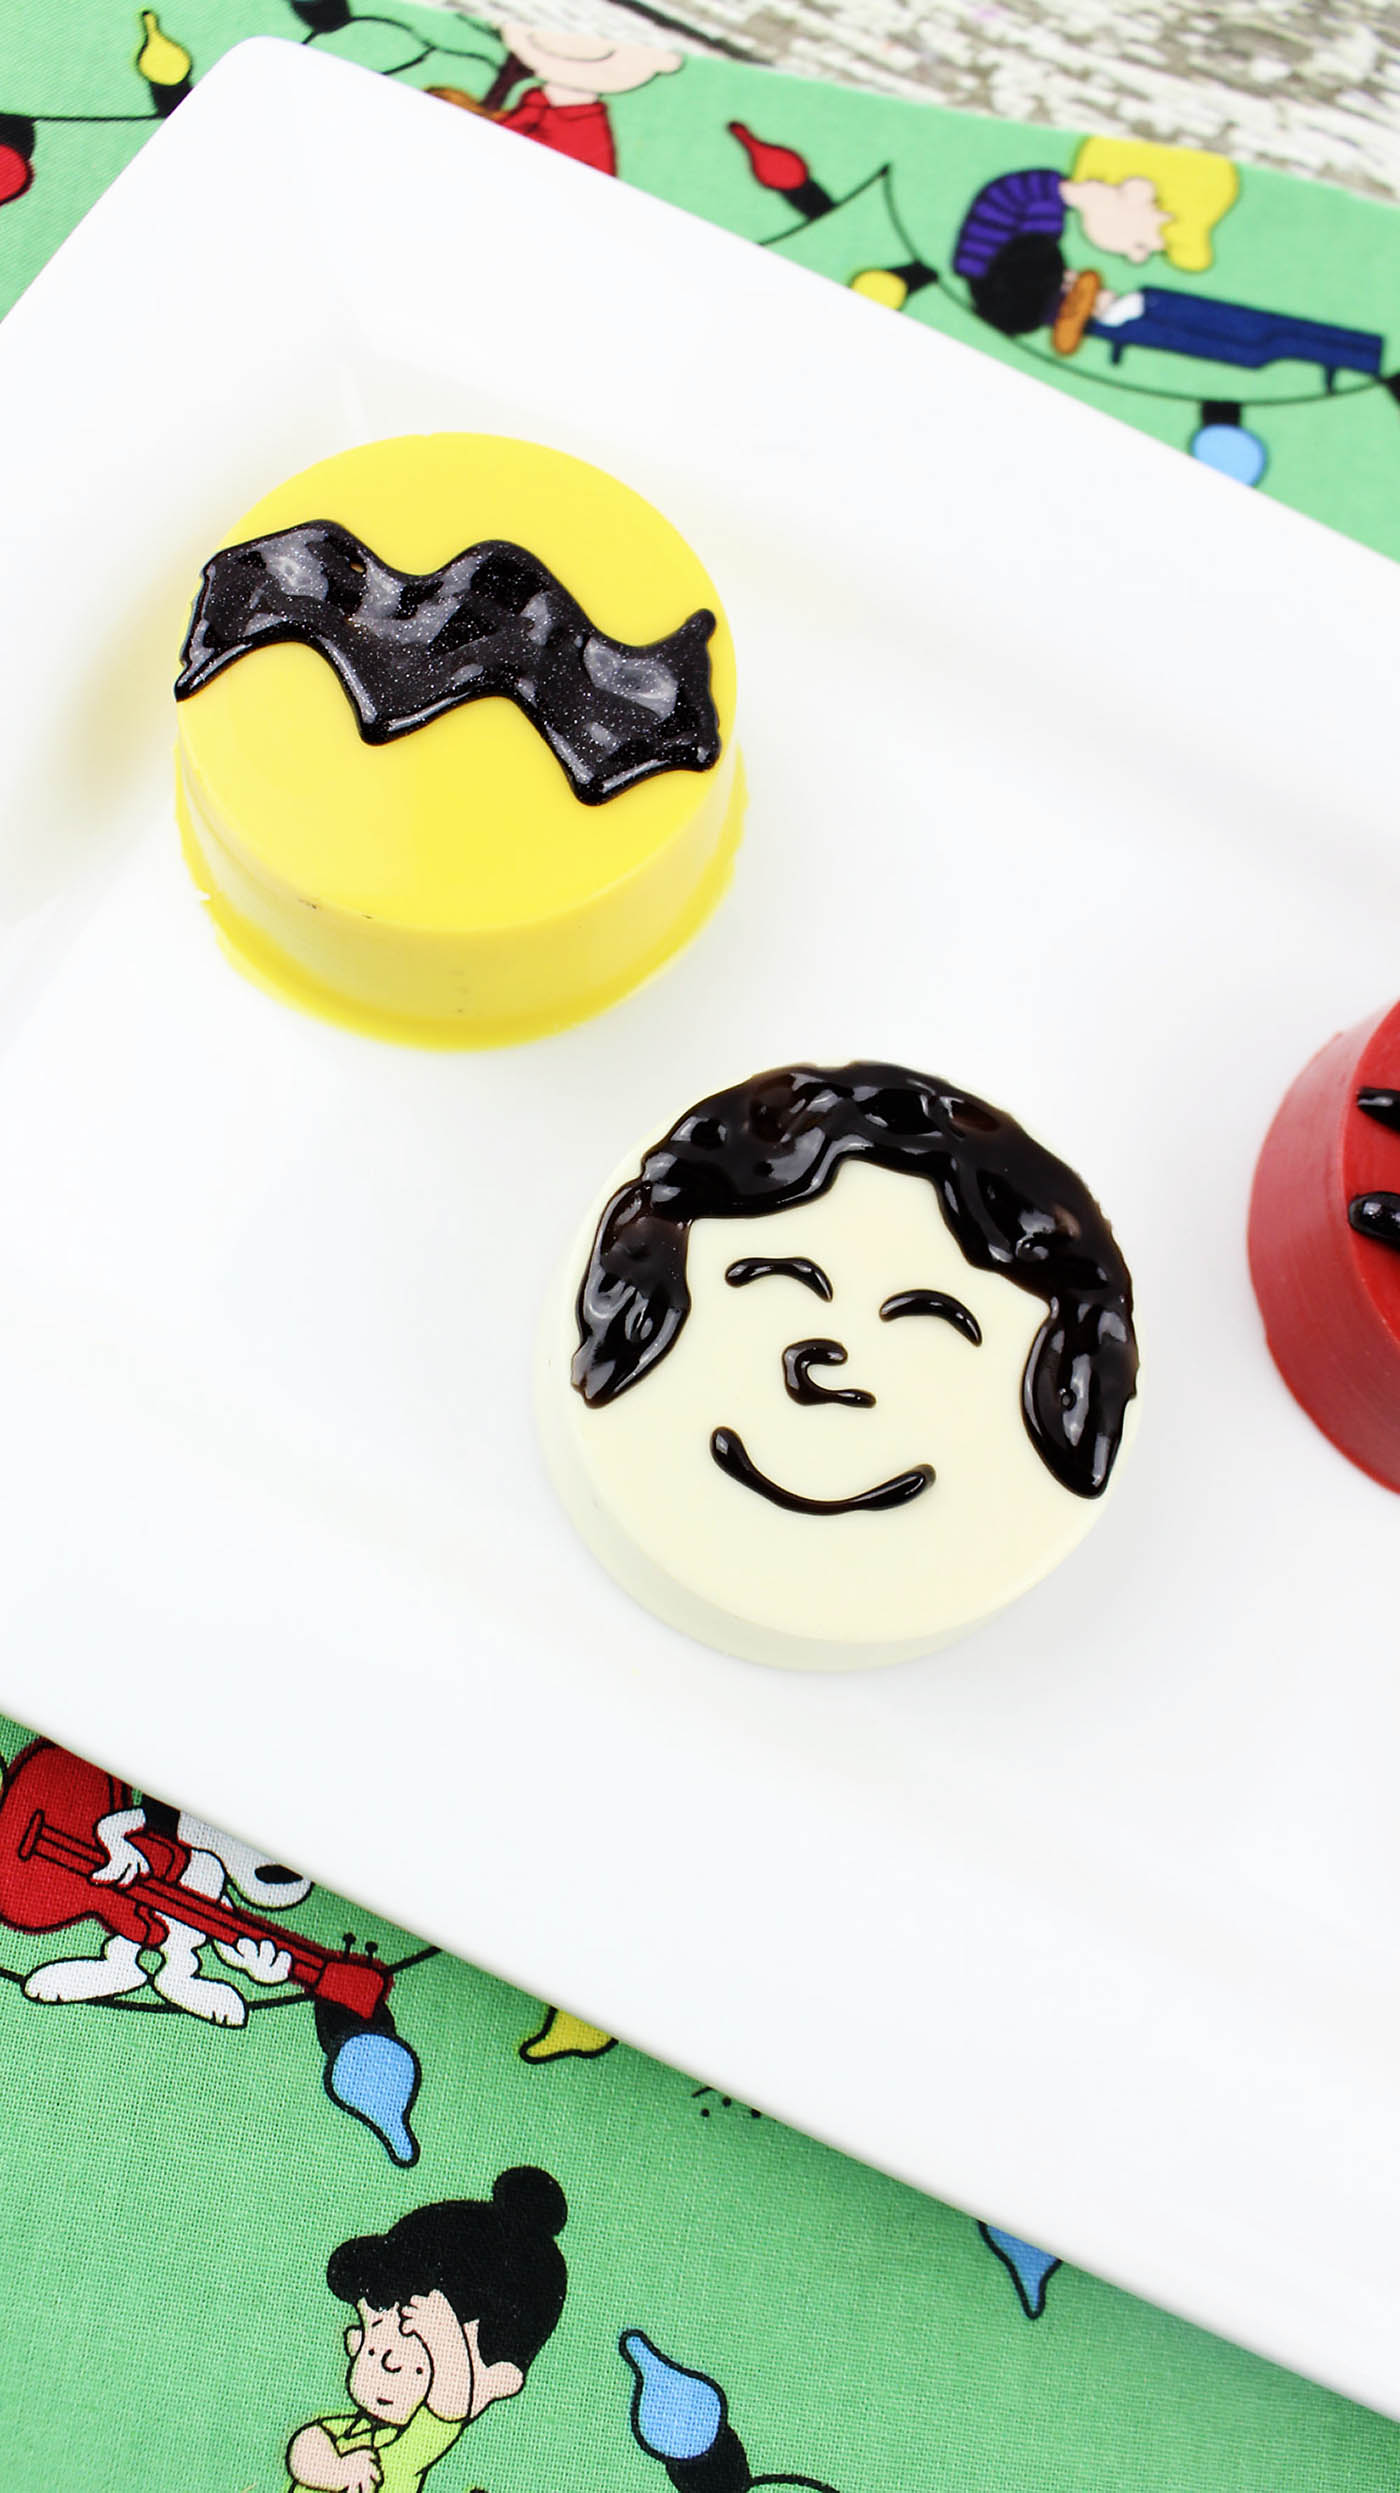 How to make "The Peanuts Gang" cookies including Charlie Brown, Snoopy, Lucy and Linus!